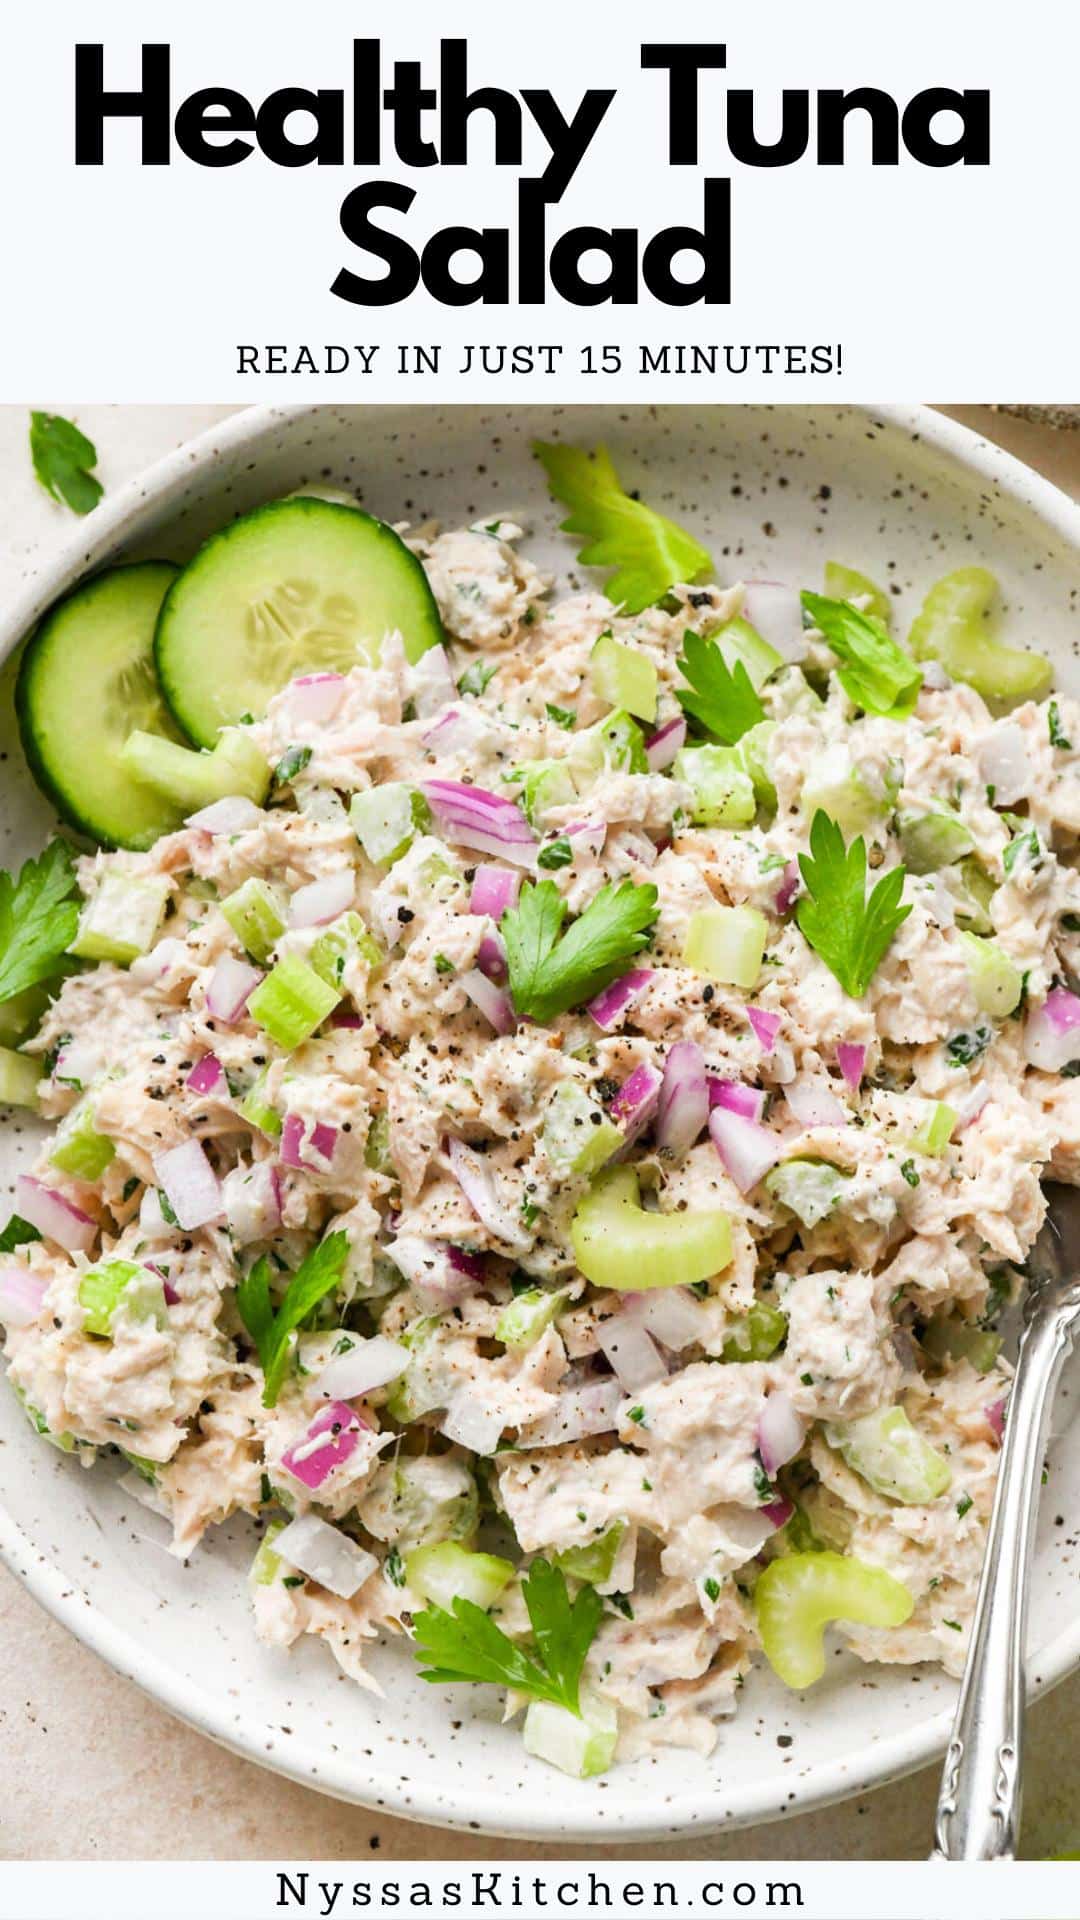 This healthy tuna salad is loaded with protein, veggies, and healthy fats that are sure to keep you full throughout the day! A classic and flavorful dish that is perfect to make in advance and enjoy throughout the week. Just as delicious on its own as it is on a sandwich or over salad greens. Ready in just 15 minutes!